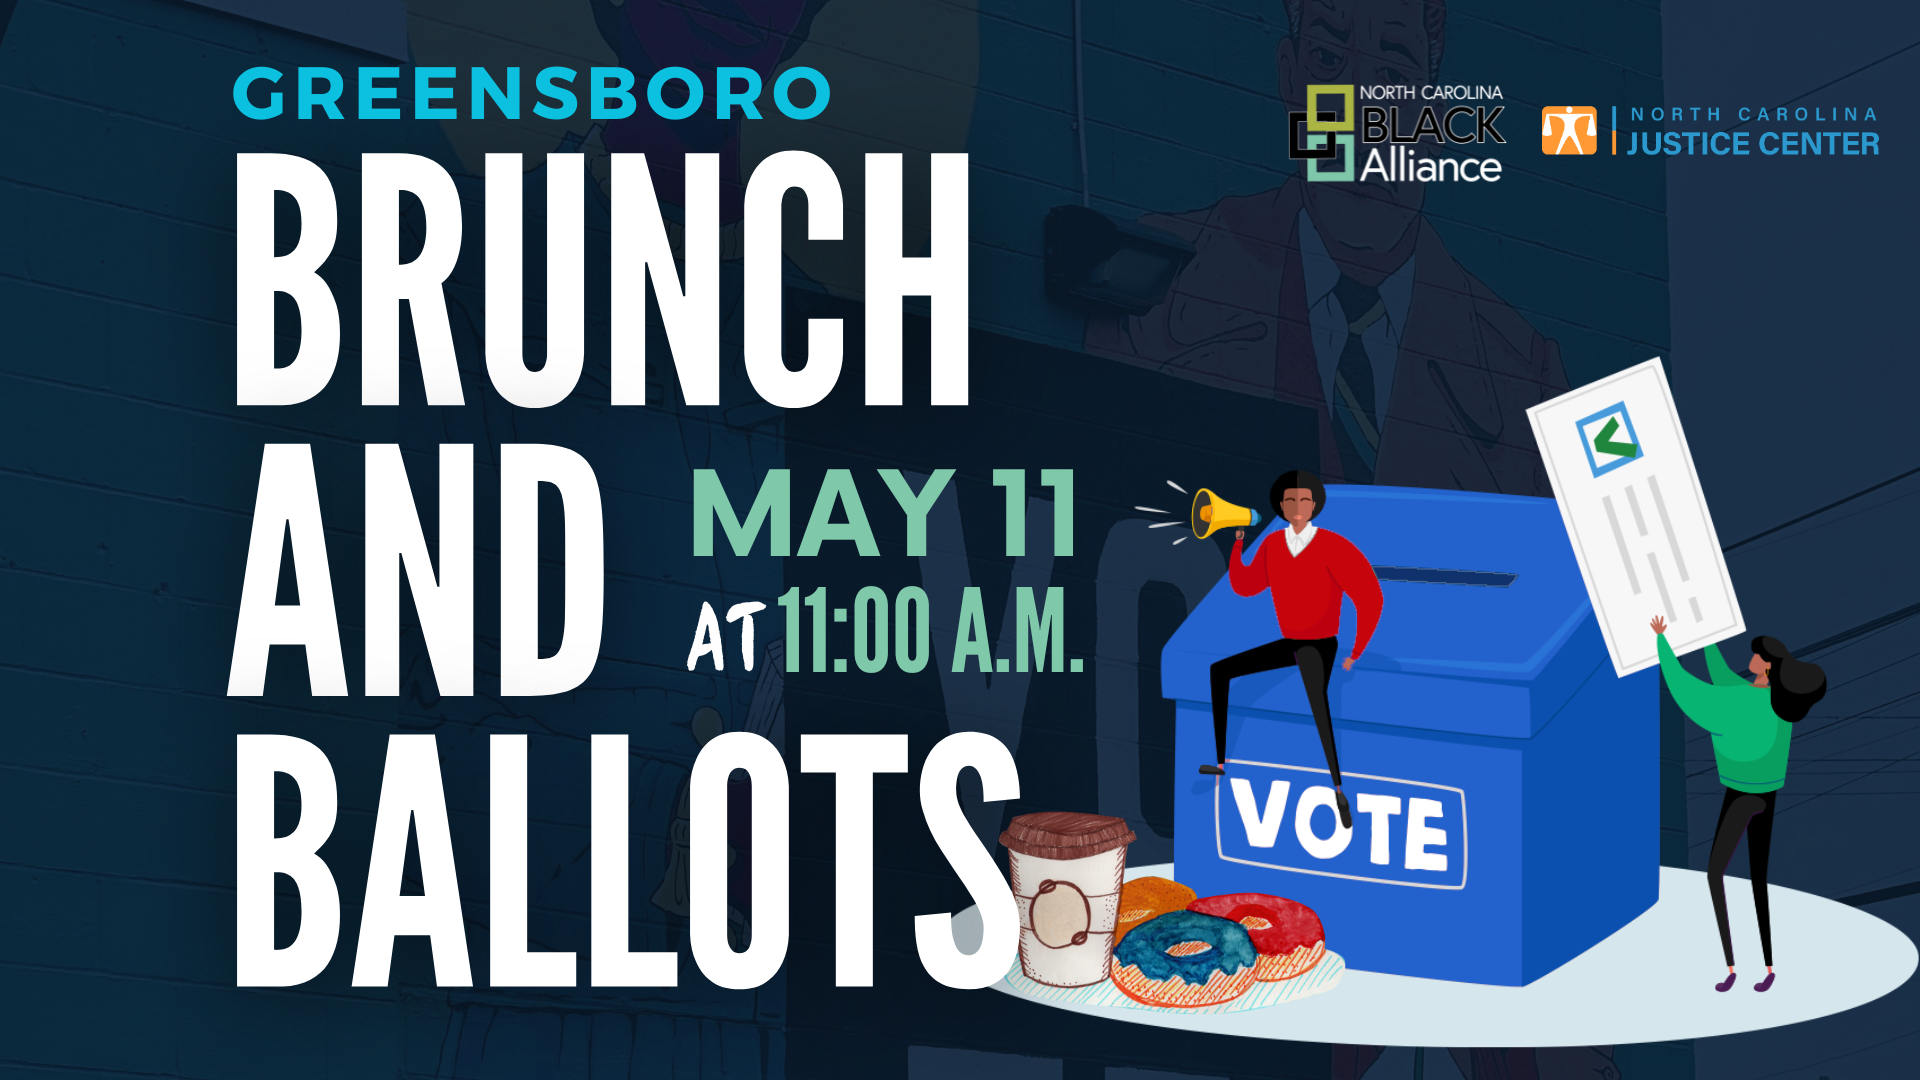 Brunch and Ballots in Greensboro on May 11 at 11 am